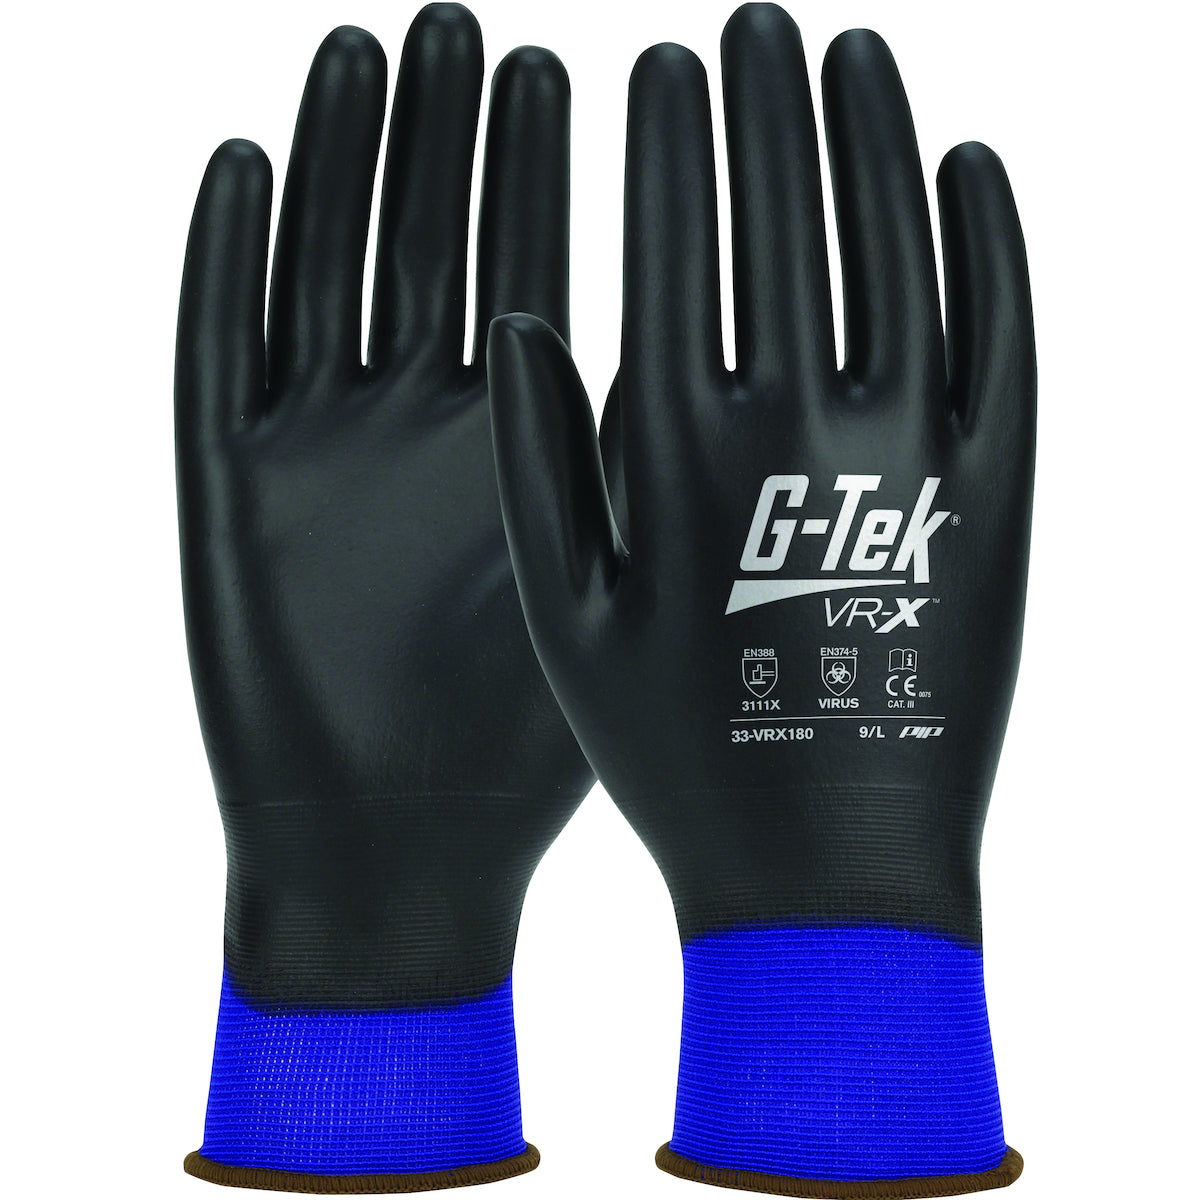 PIP - G-TEK VR-X Seamless Knit Nylon Glove with Polyurethane Advanced Barrier Protection Coating on Full Hand – Touchscreen Compatible -Dozen